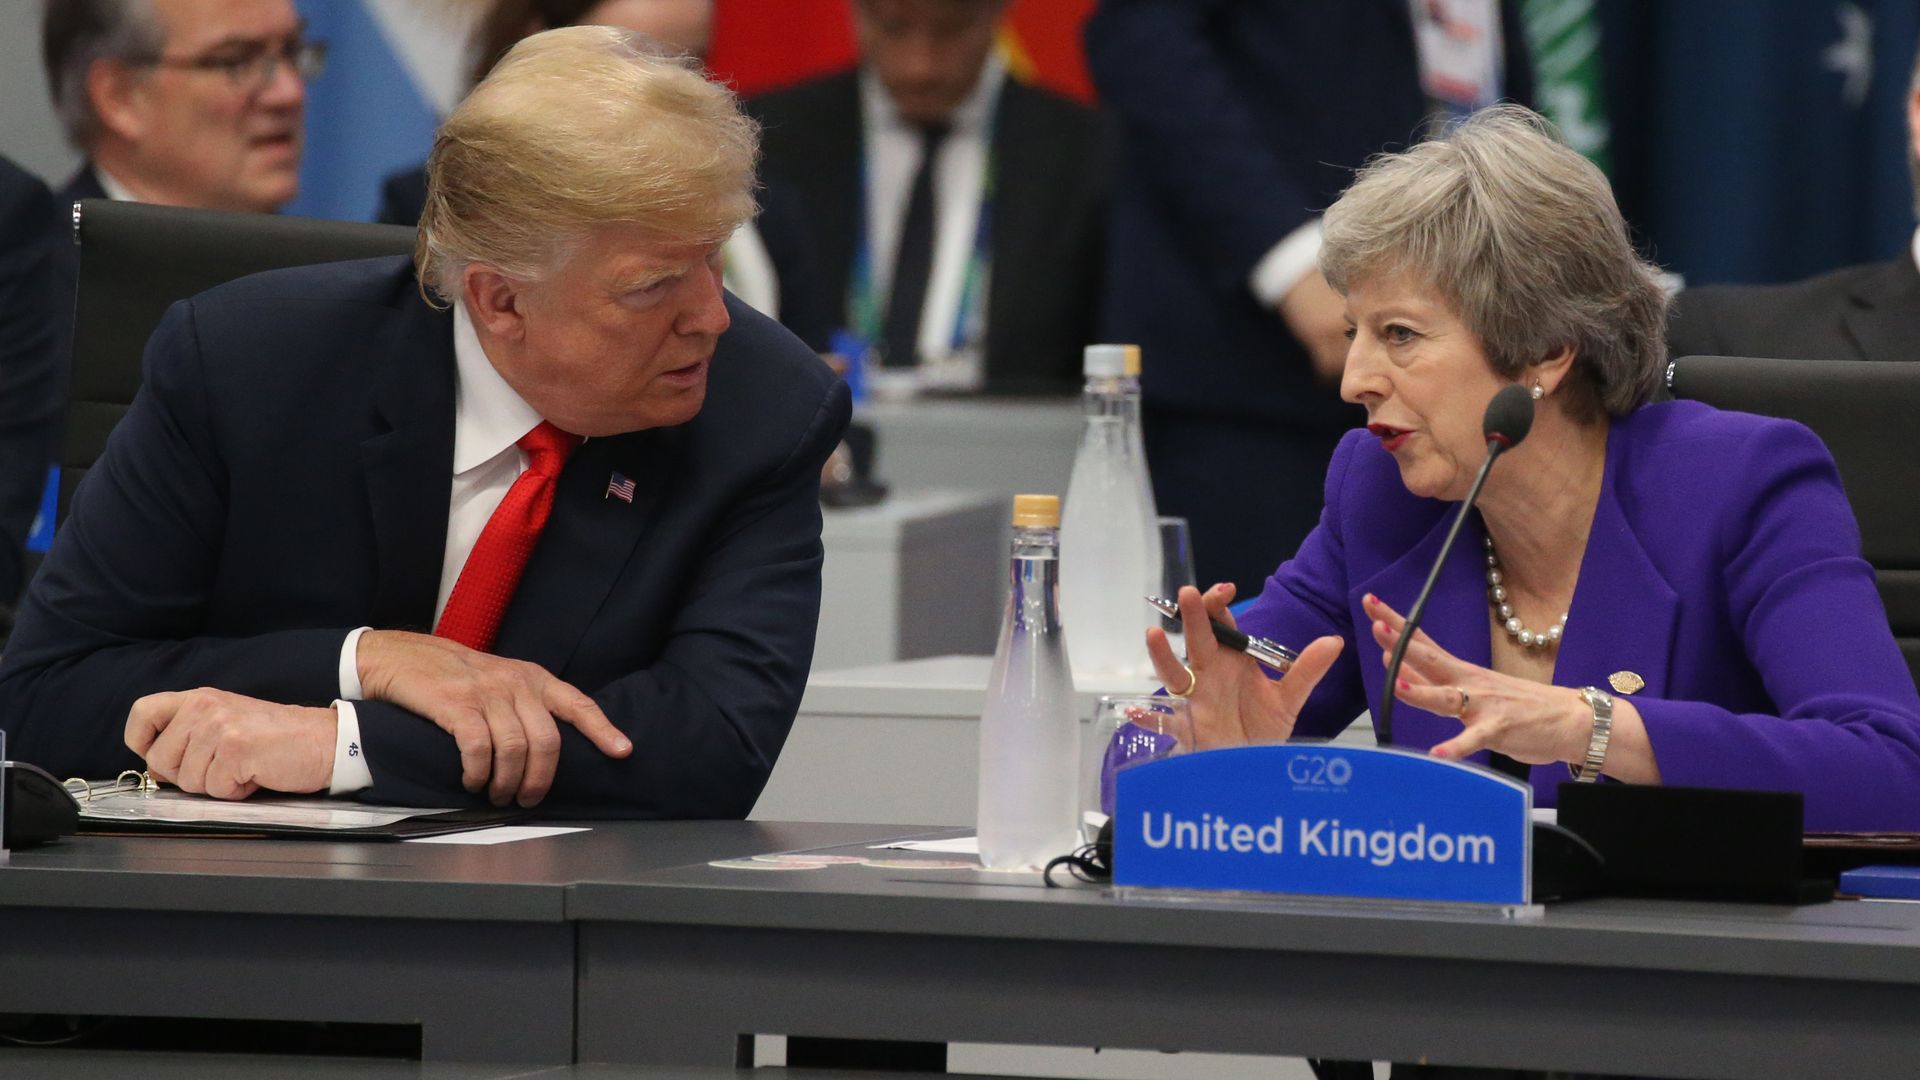 Donald Trump and Theresa May seated next to each other at a conference table